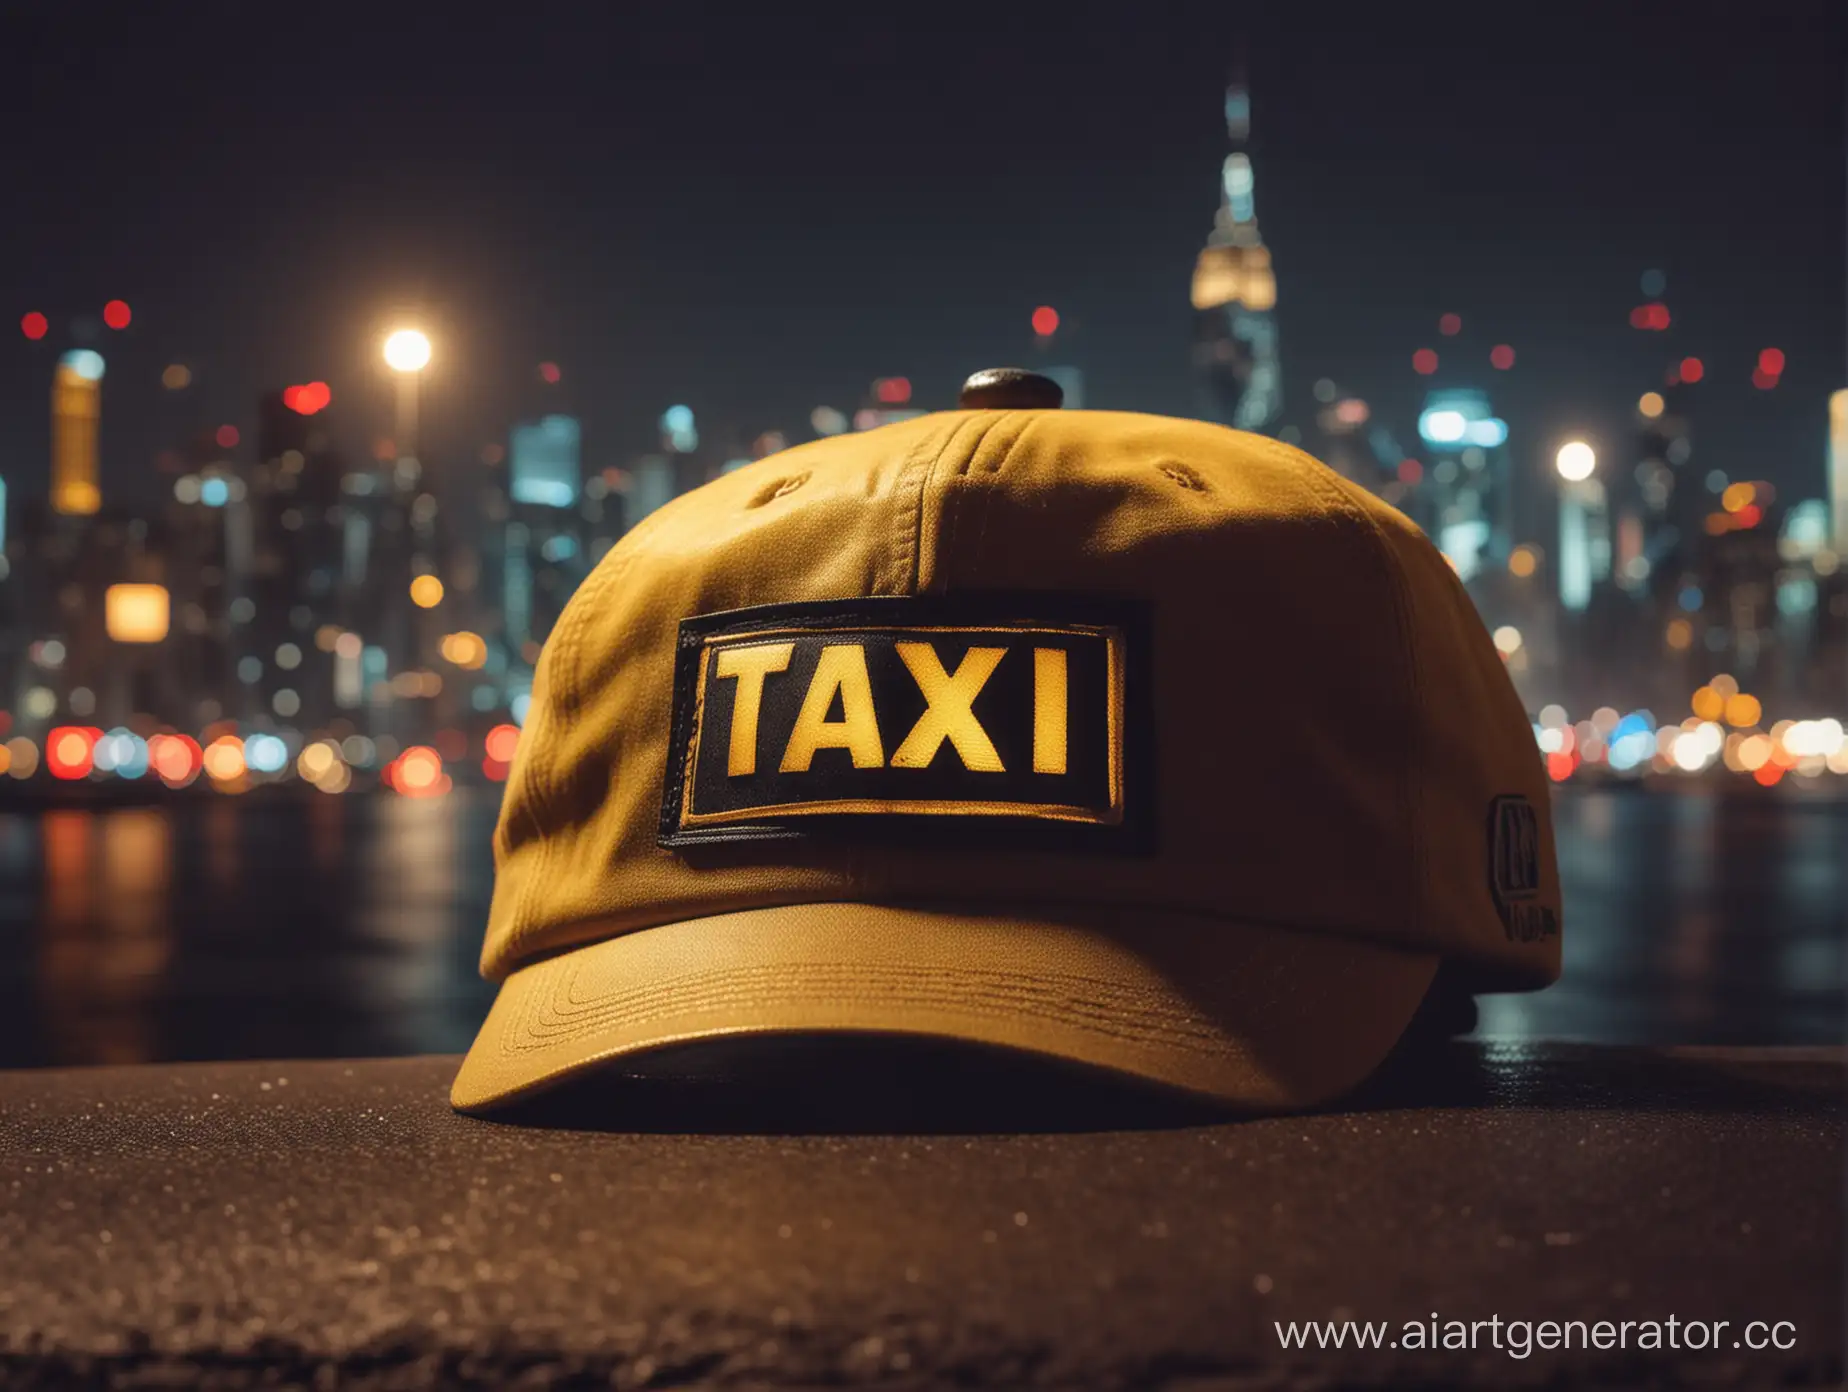 Taxi-Cab-Silhouetted-Against-Urban-Night-Skyline